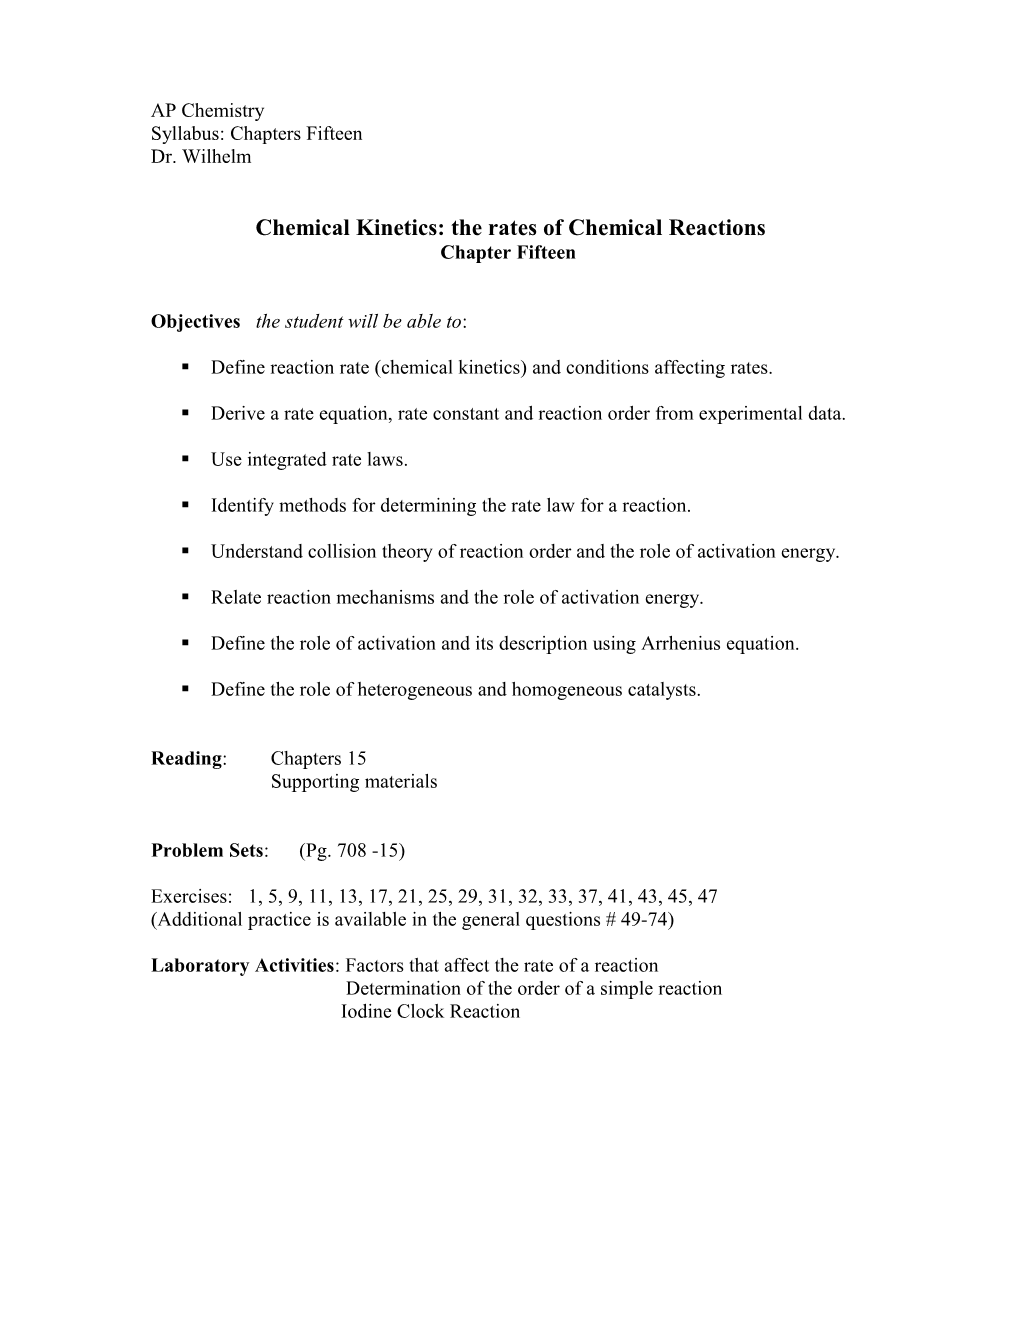 Chemical Kinetics: the Rates of Chemical Reactions